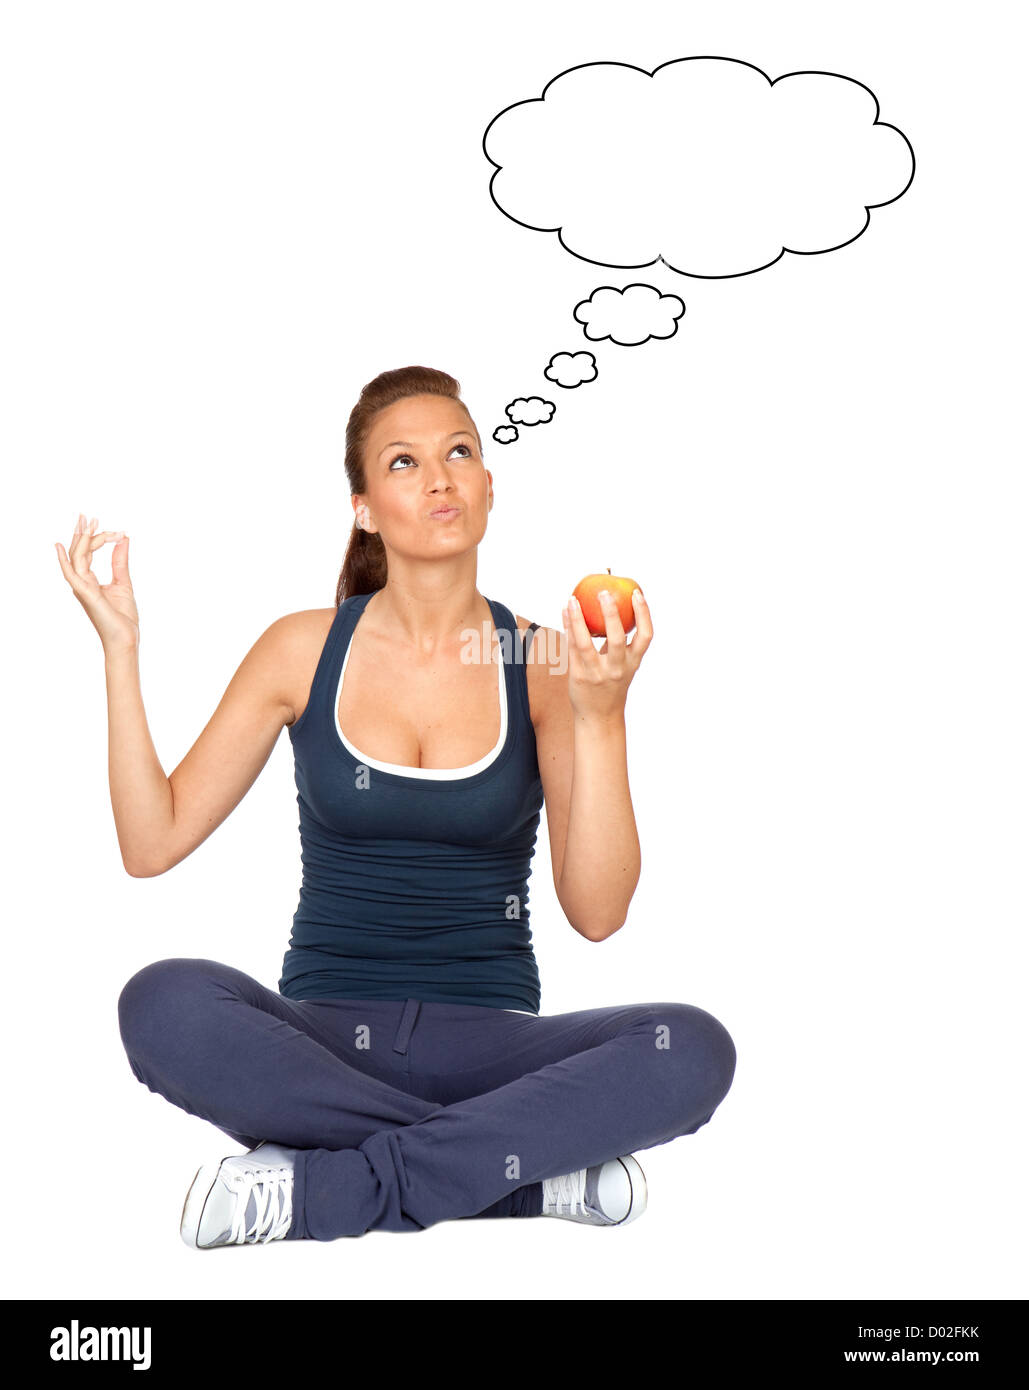 Gymnastics girl thinking with an apple sitting with cross-legs on white background Stock Photo